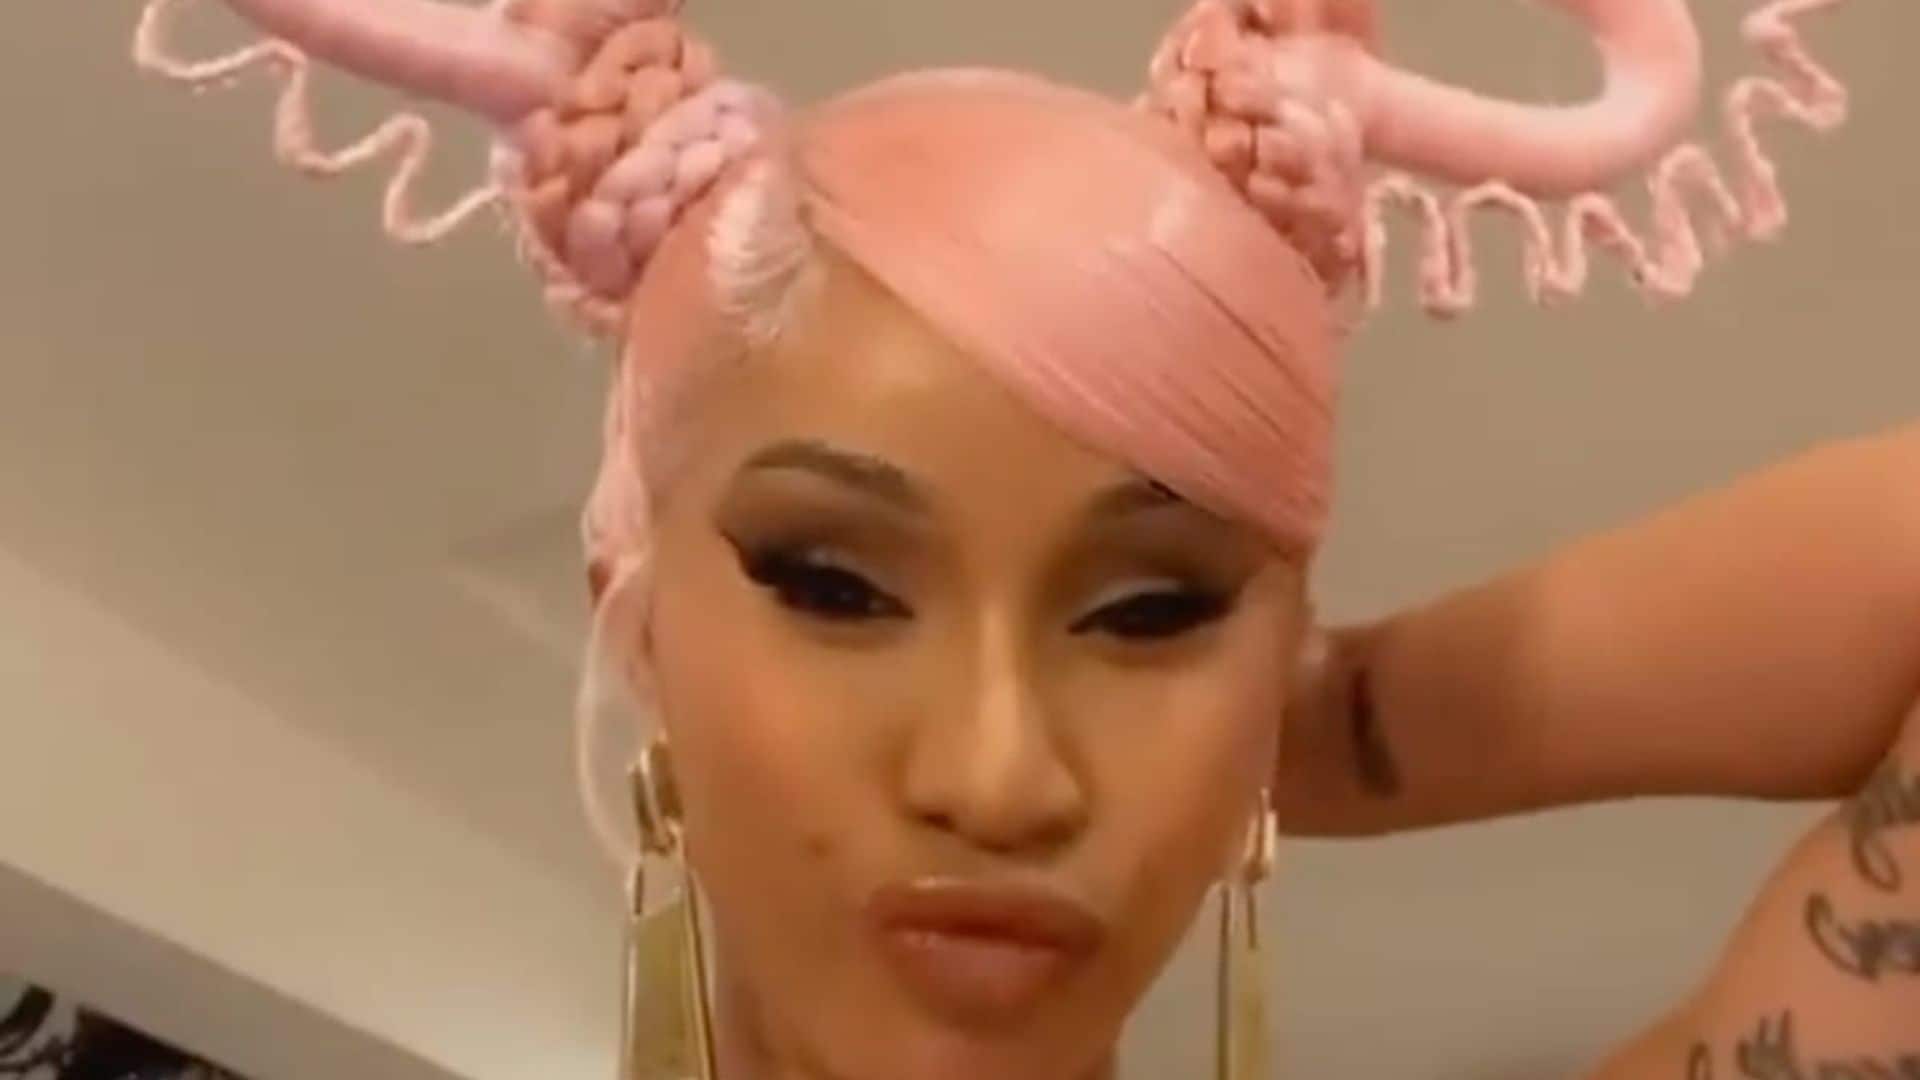 Cardi B lays down her Valentine’s Day gift giving rules